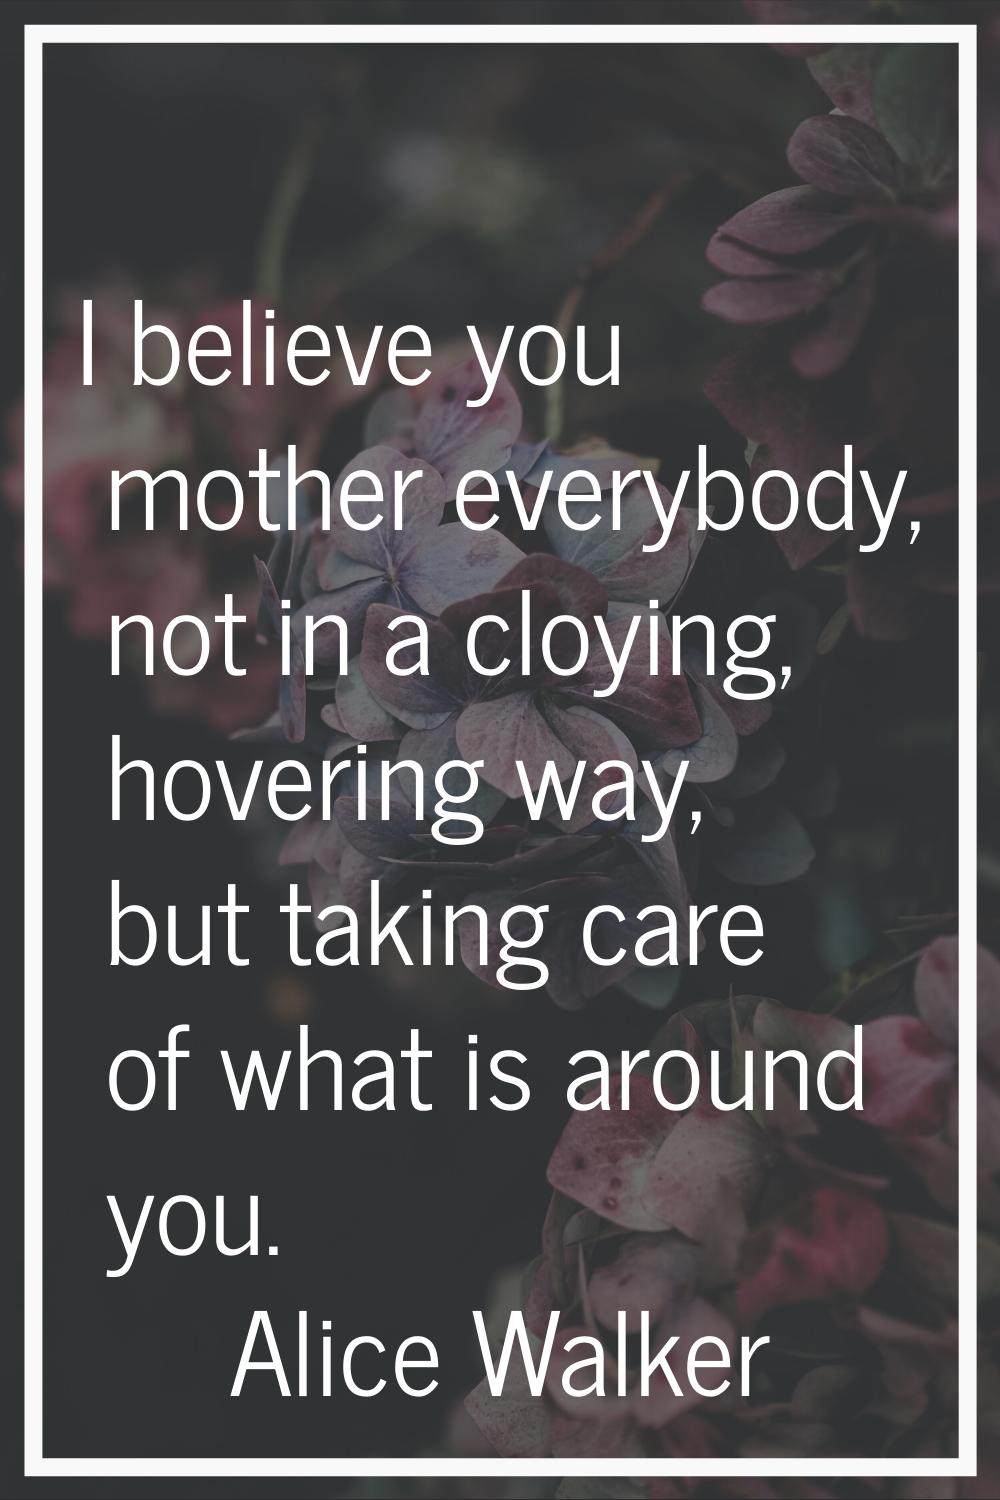 I believe you mother everybody, not in a cloying, hovering way, but taking care of what is around y